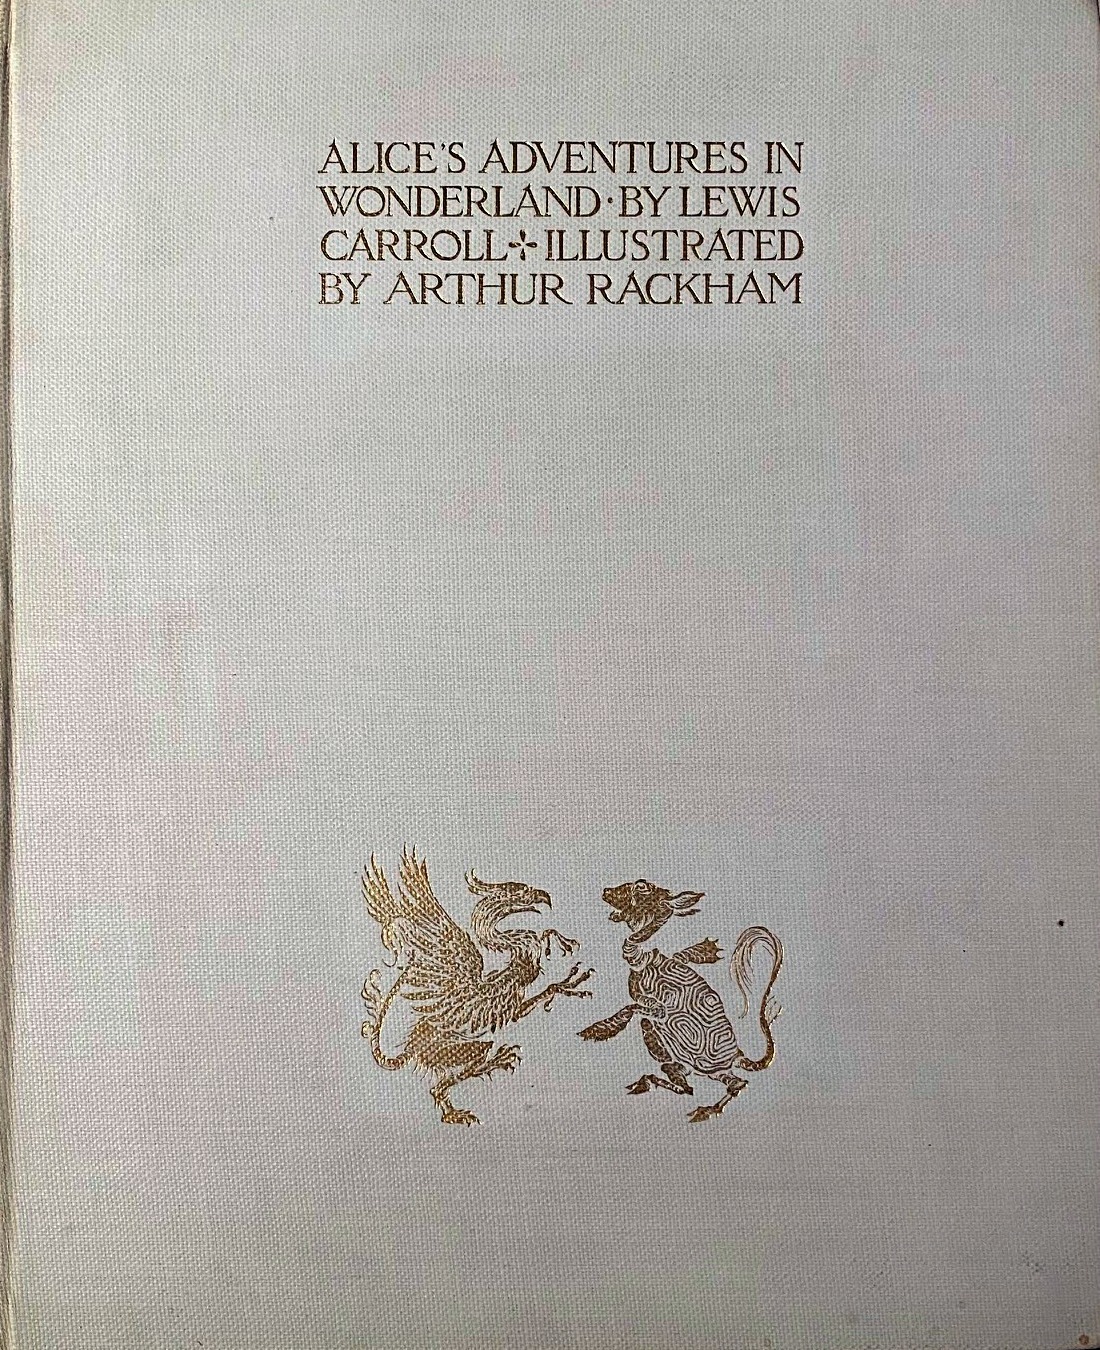 Alice's Adventures in Wonderland by Lewis Carroll, illustrated by Arthur Rackham with a proem by Austin Dobson